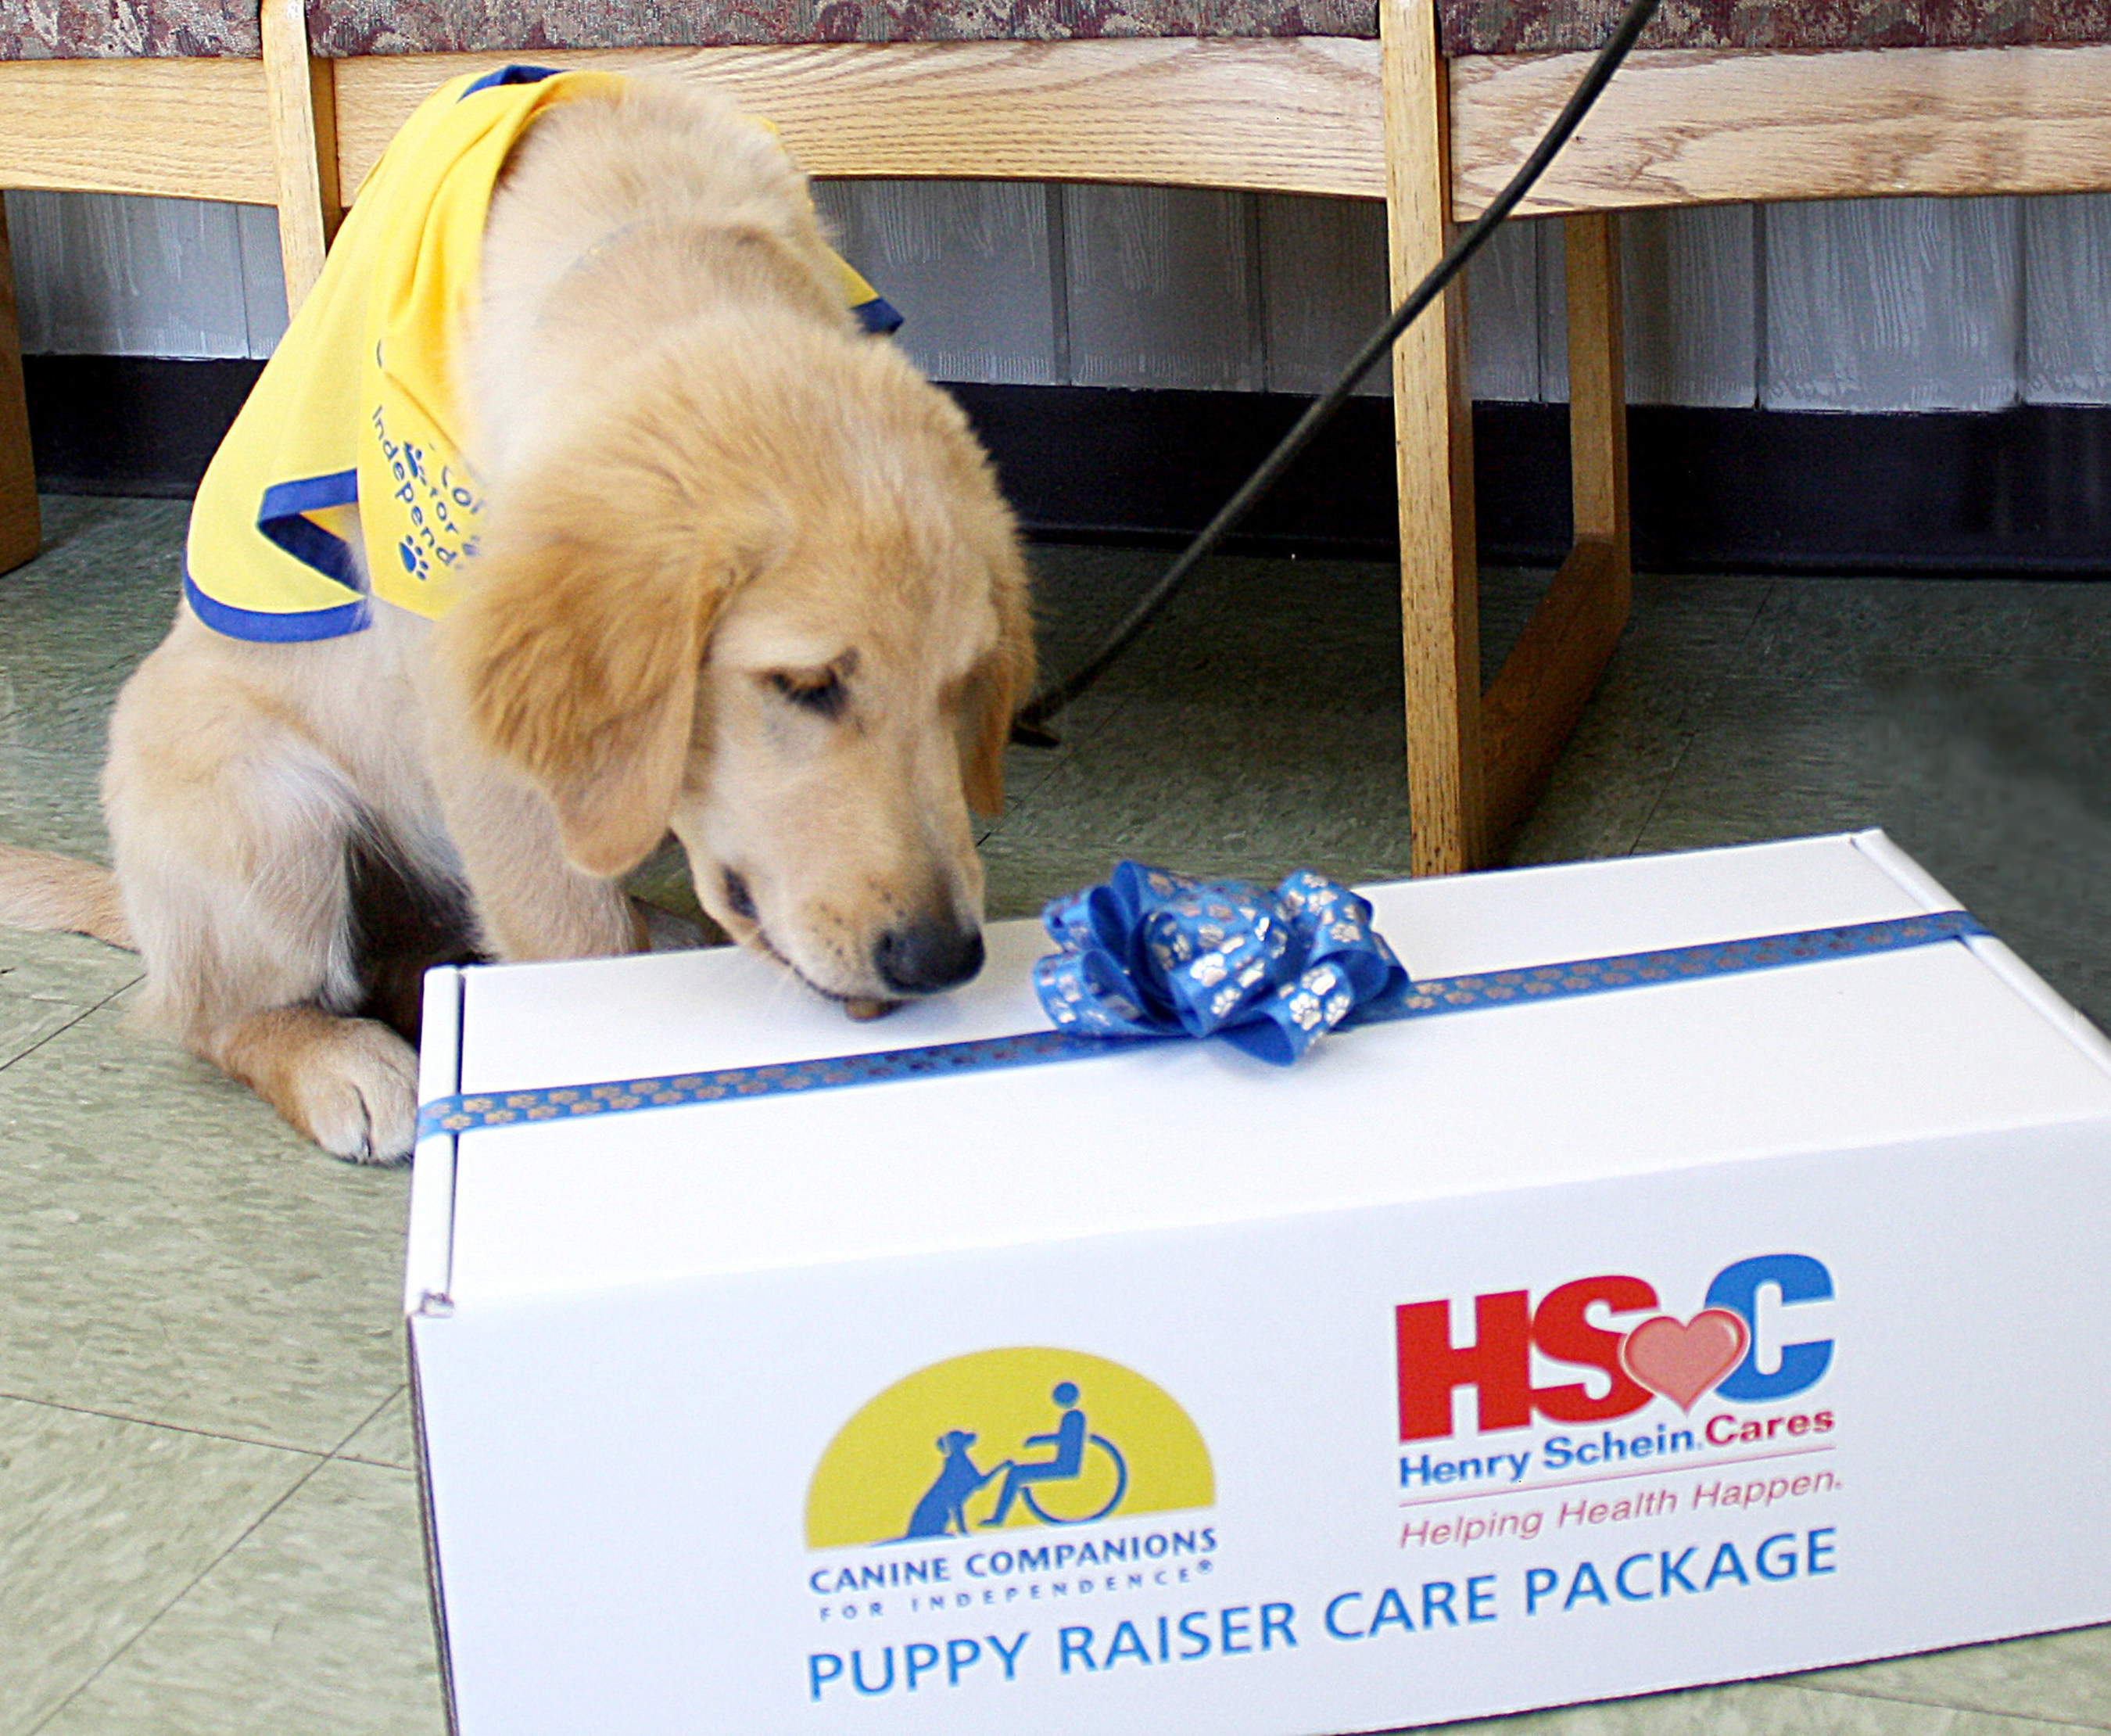 Henry Schein Cares-Canine Companions Puppy Raiser Care Packages began shipping to veterinarians and volunteer puppy raisers who care for puppies in the first 18 months of life. The care packages, filled with essential products, will help defray costs for veterinarians and puppy raisers as they prepare the puppies to become assistance dogs for those in need.